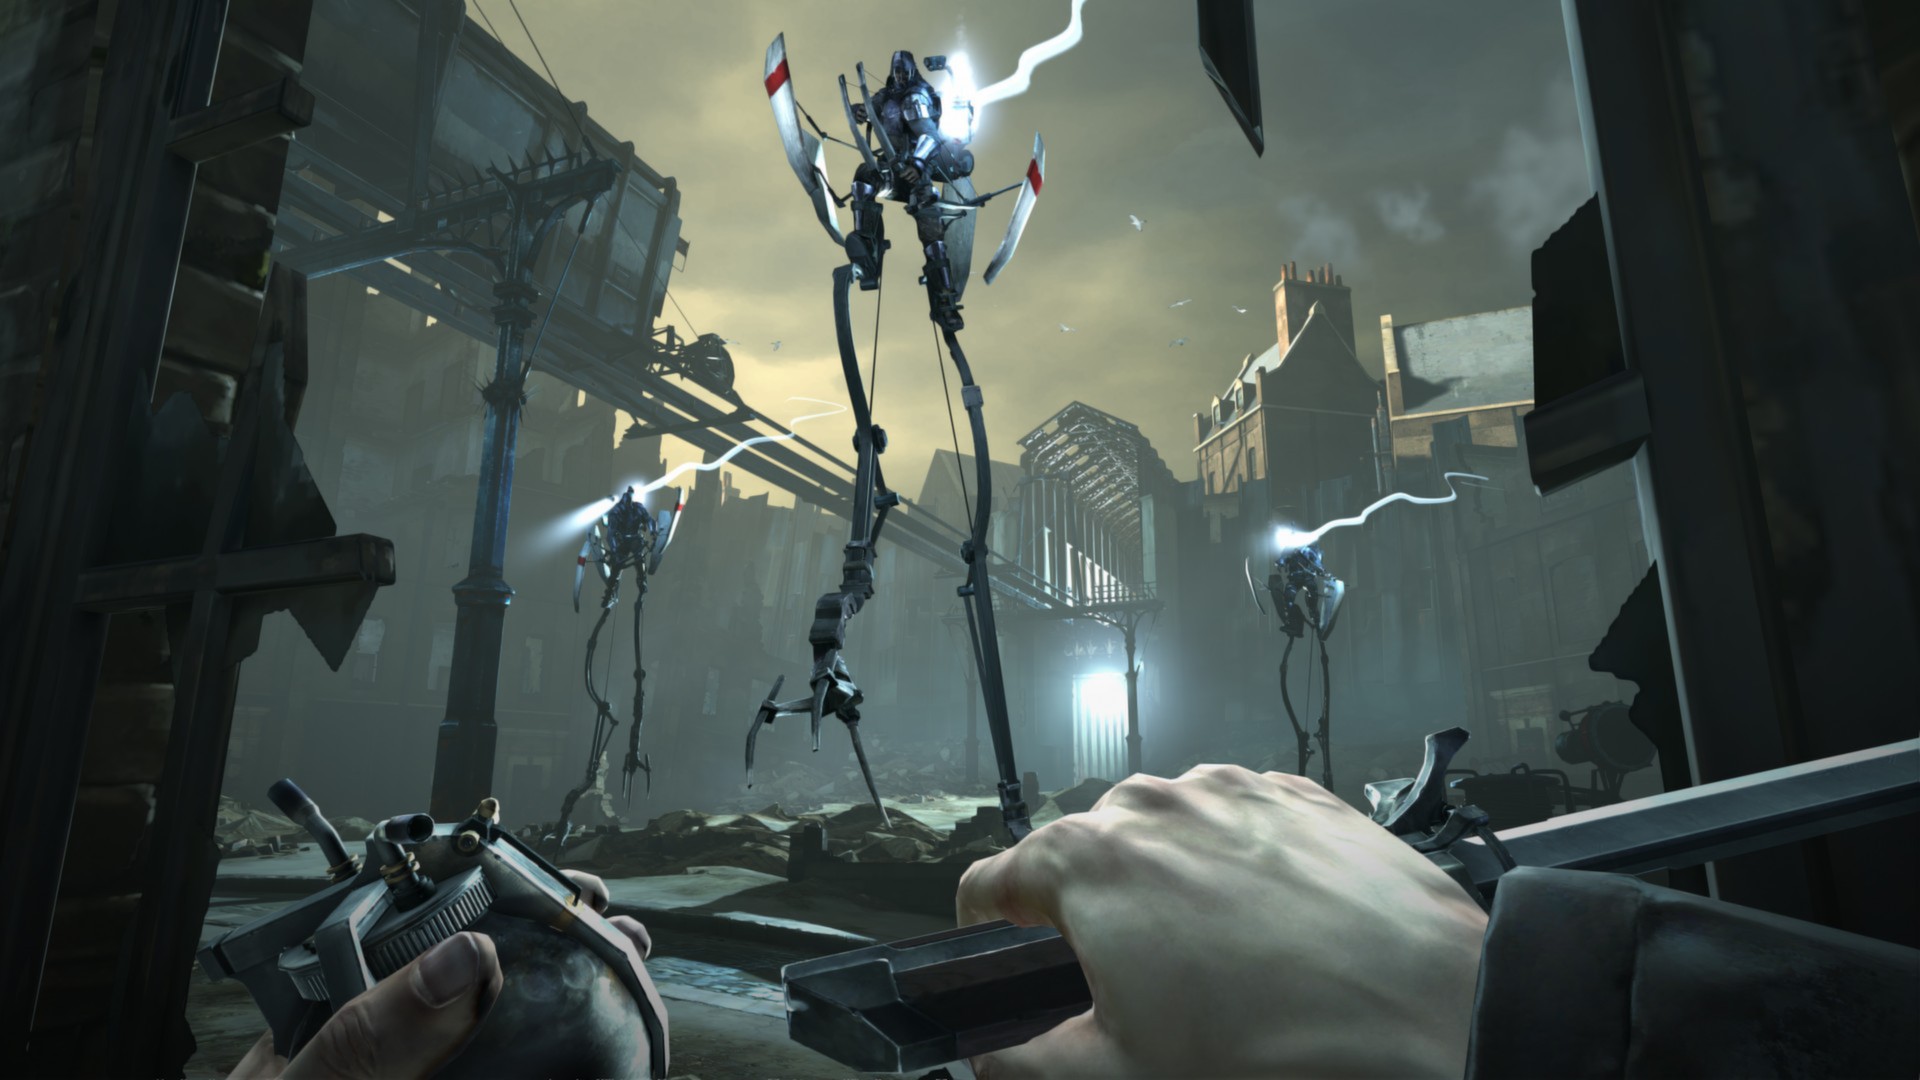 A screenshot from the video game Dishonored: some tall metal robots in a ruined city